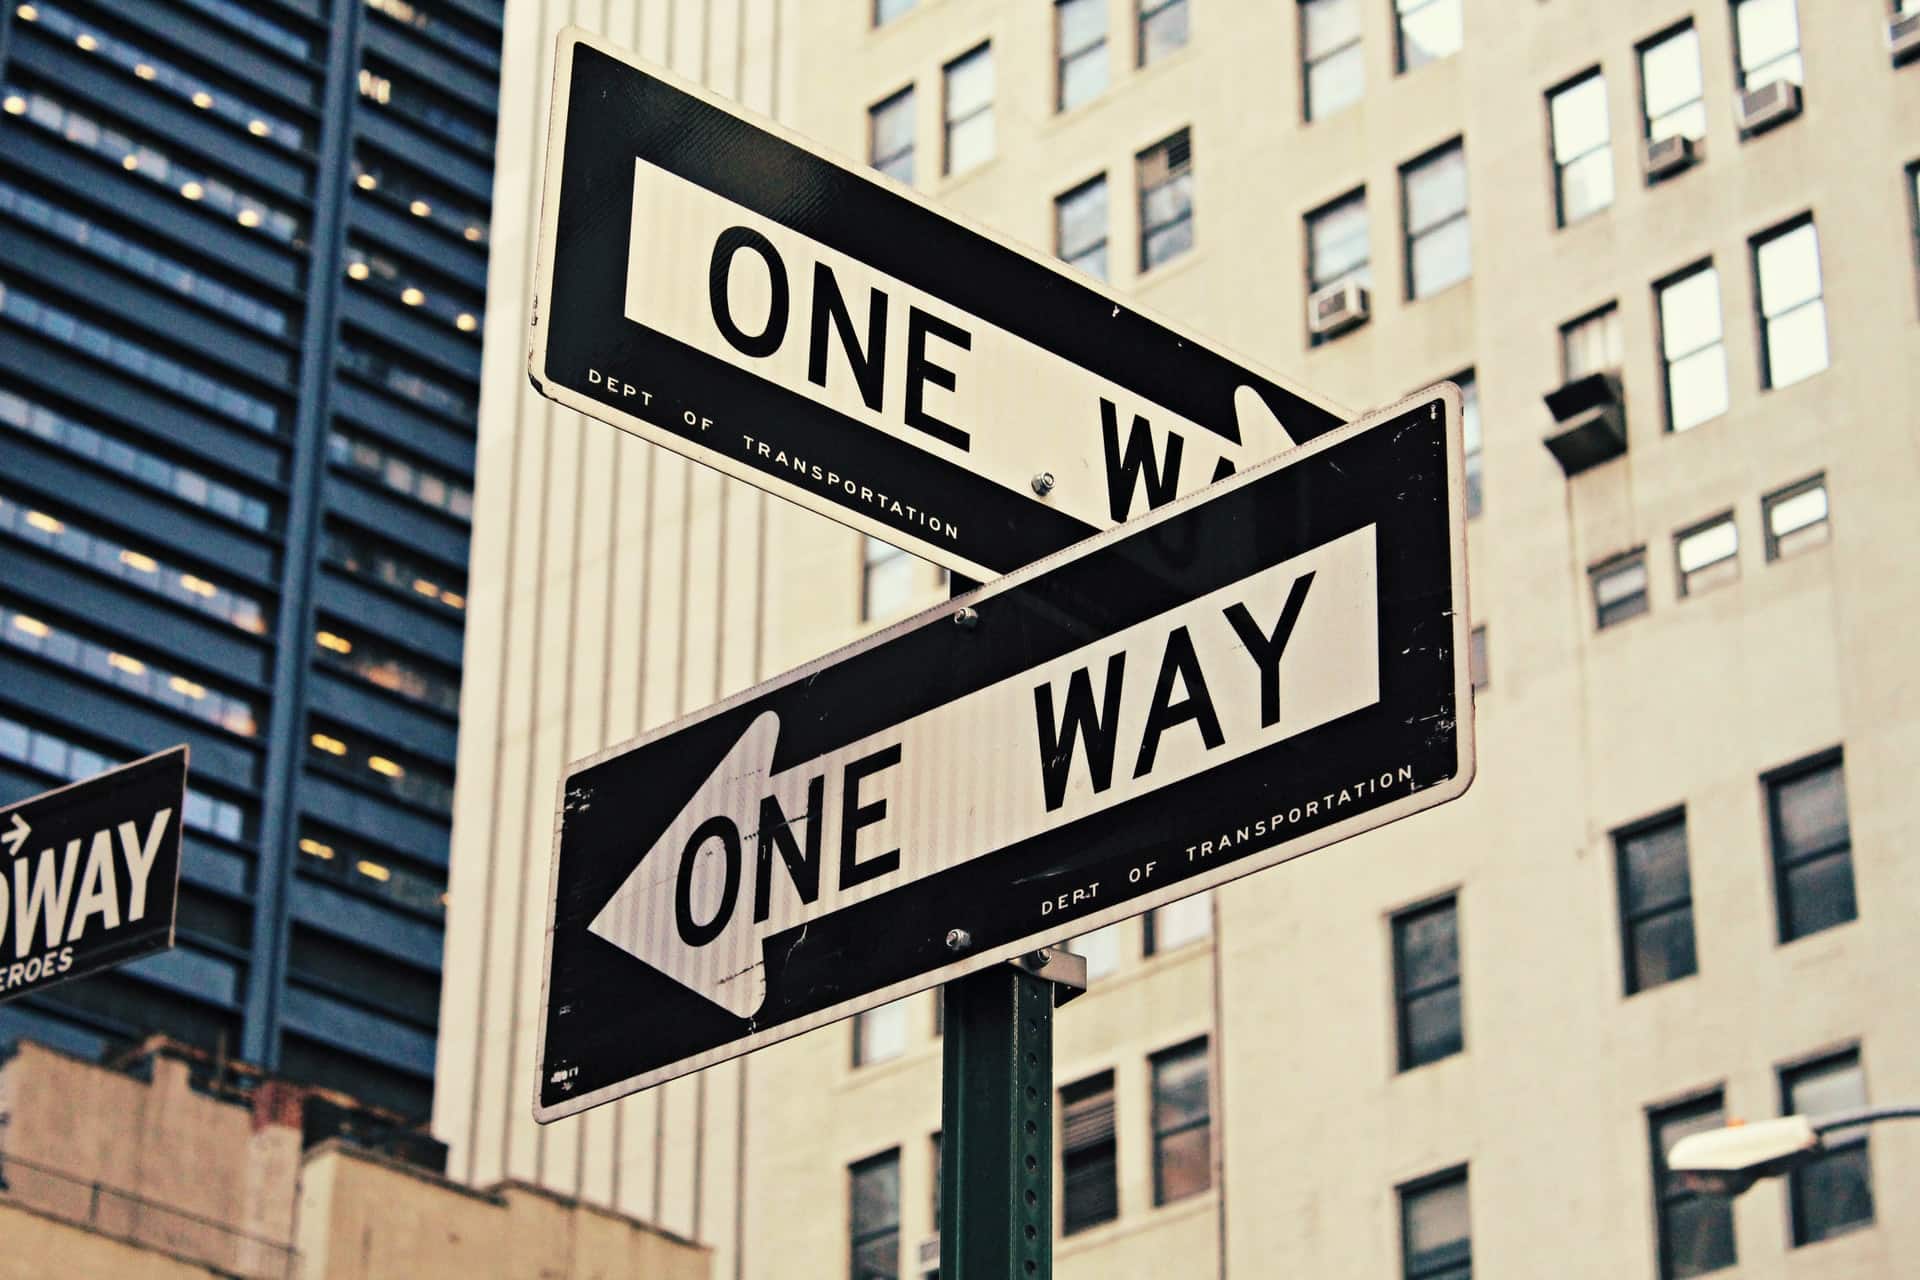 Image shows a sign pointing in two directions, illustrating the idea of a career switch.